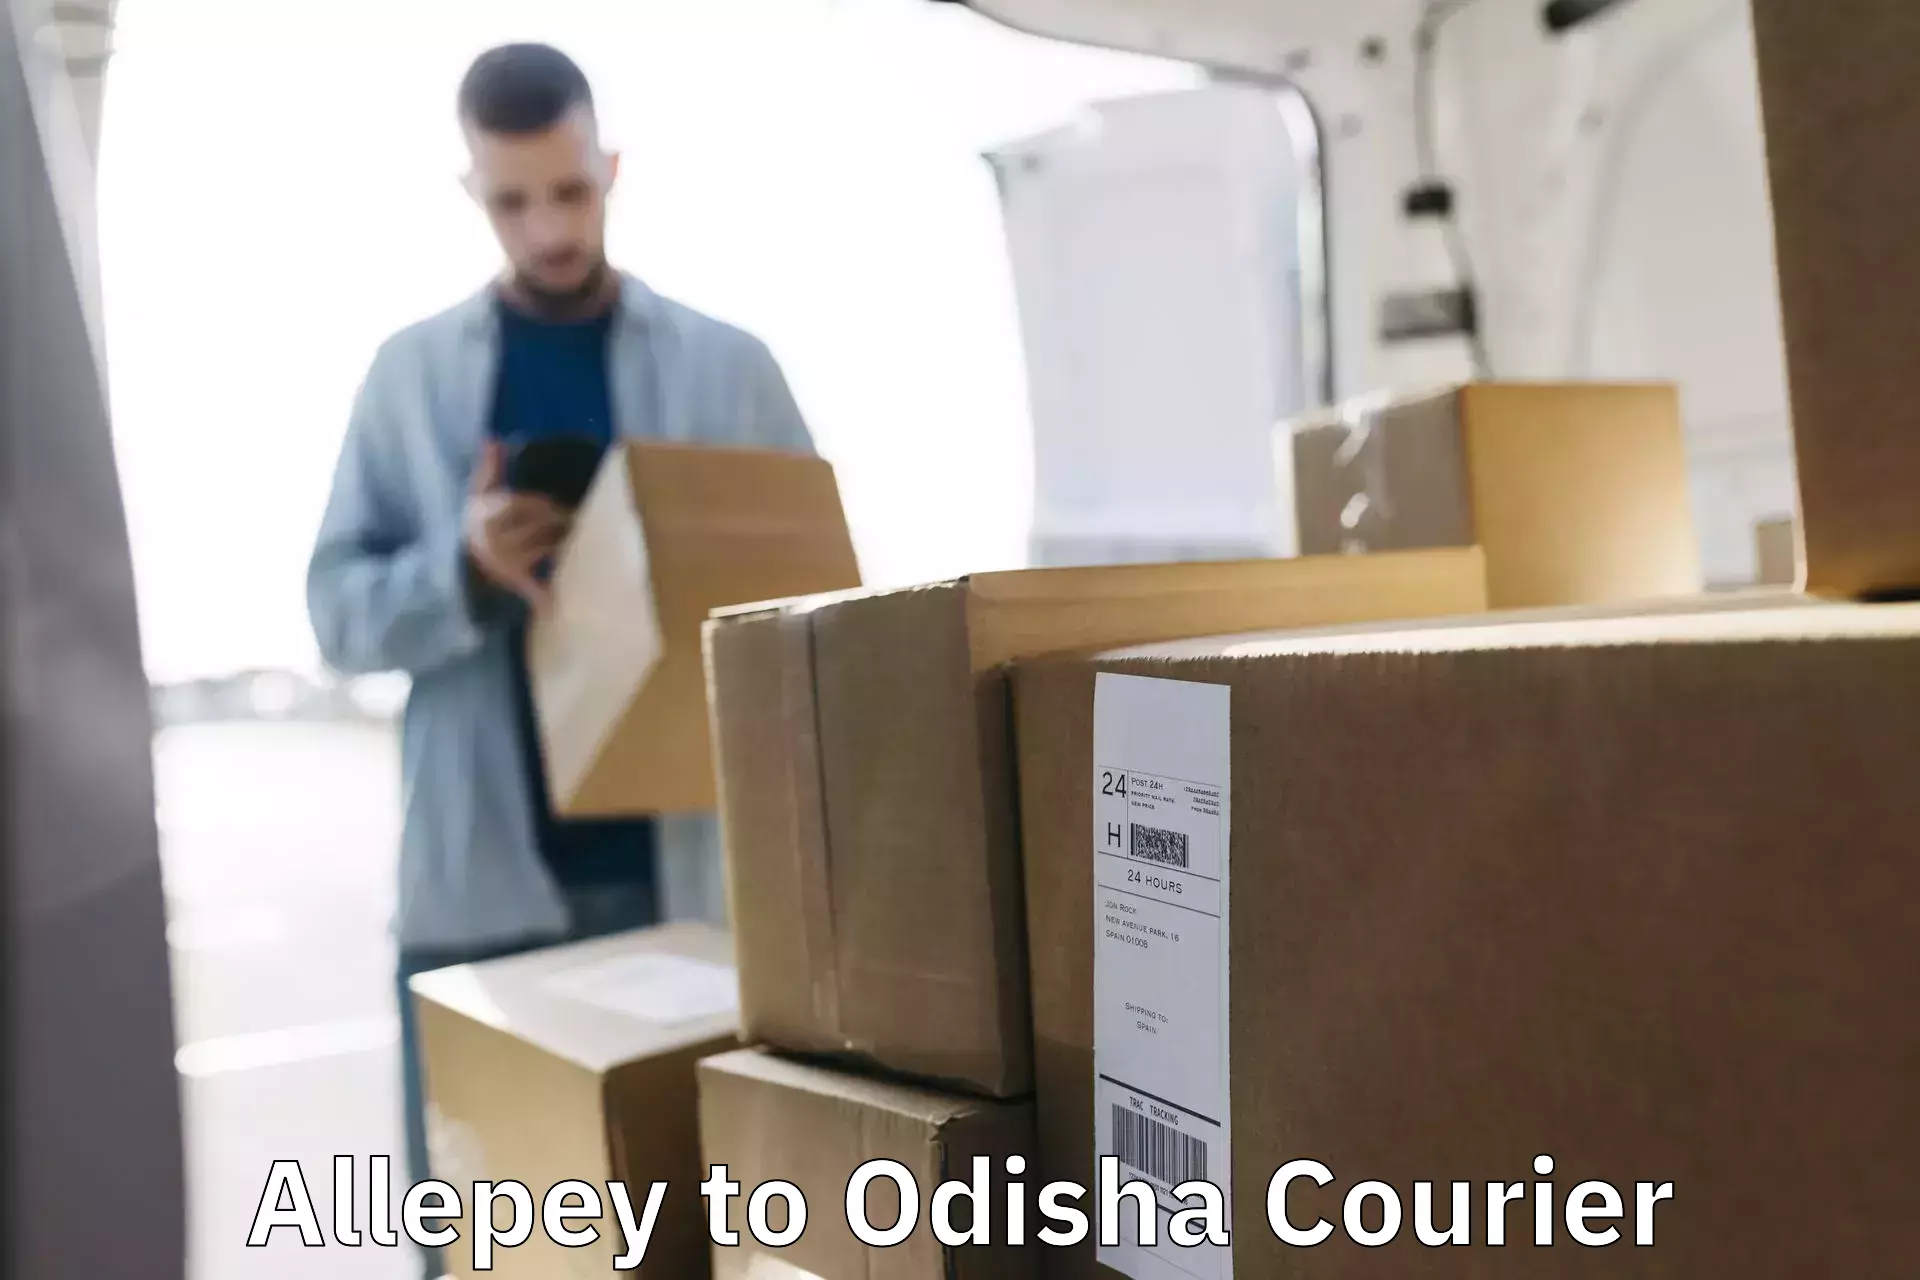 Flexible delivery schedules Allepey to Odisha